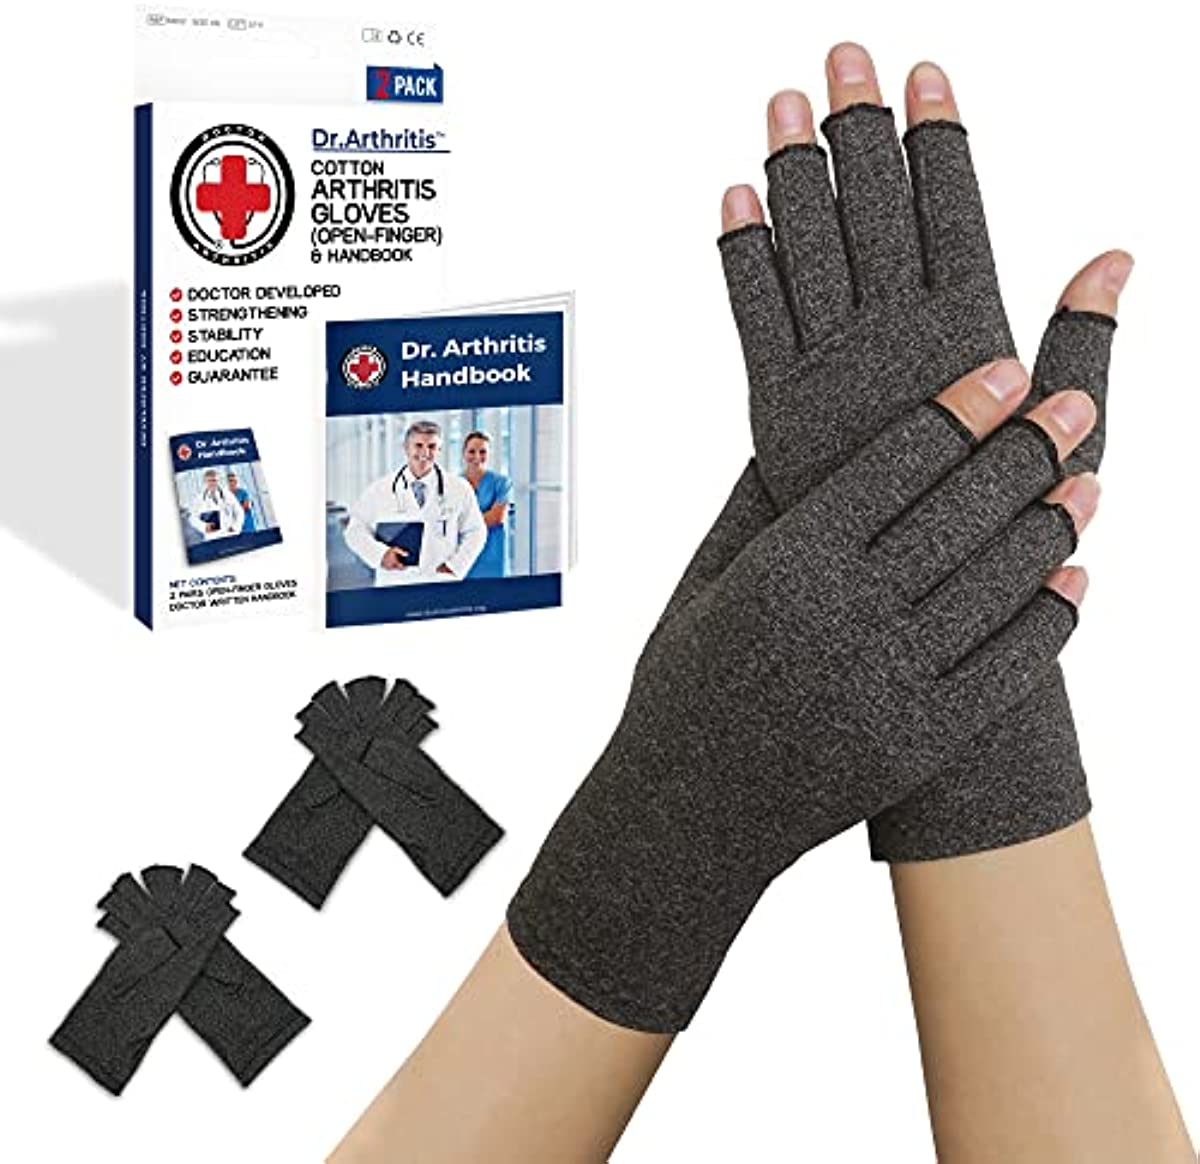 Compression Gloves for Women and Men: Arthritis Pain Relief for Hands, Daily Comfortable Wrist Support by Dr. Arthritis (Medium,2 Pairs)